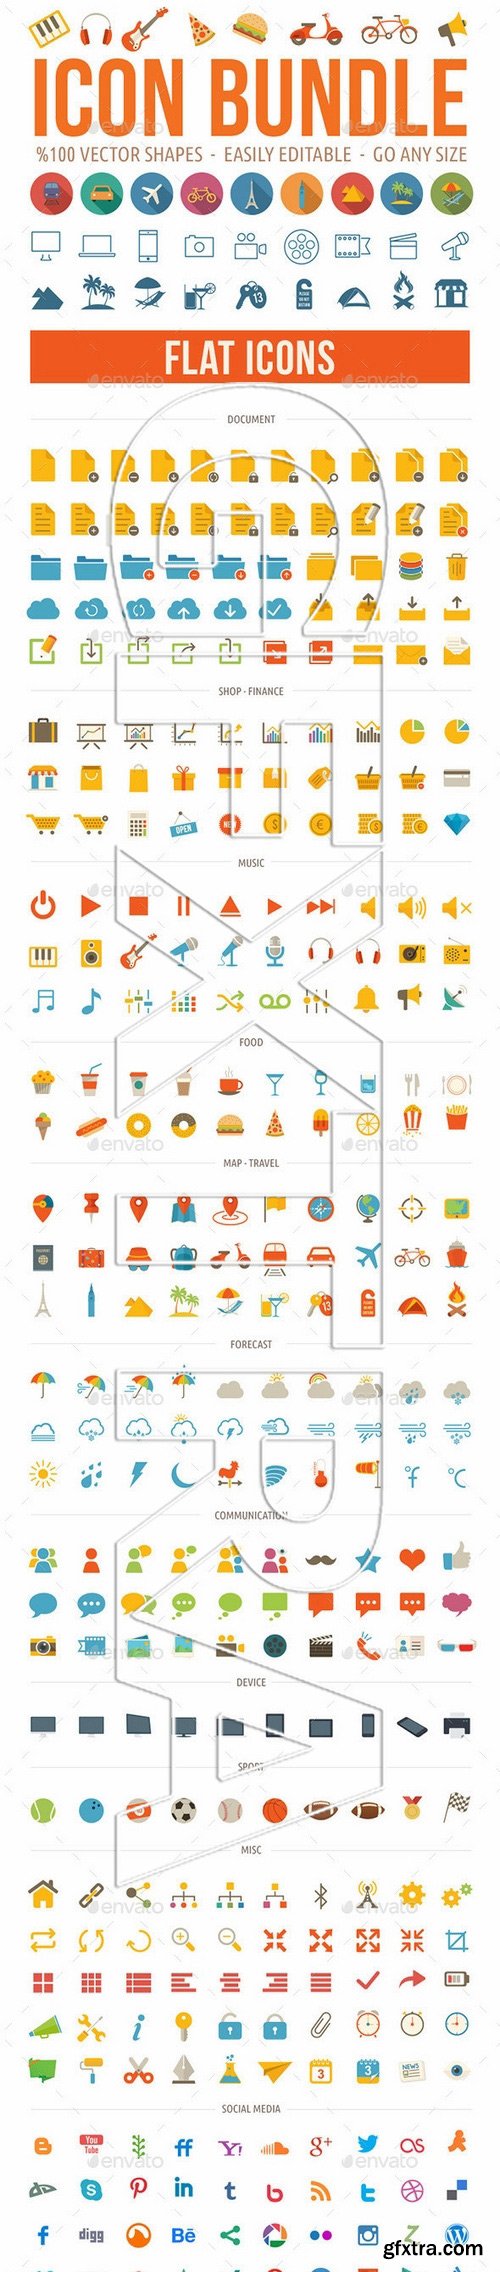 GraphicRiver - 2000 Vector Icons 6660683